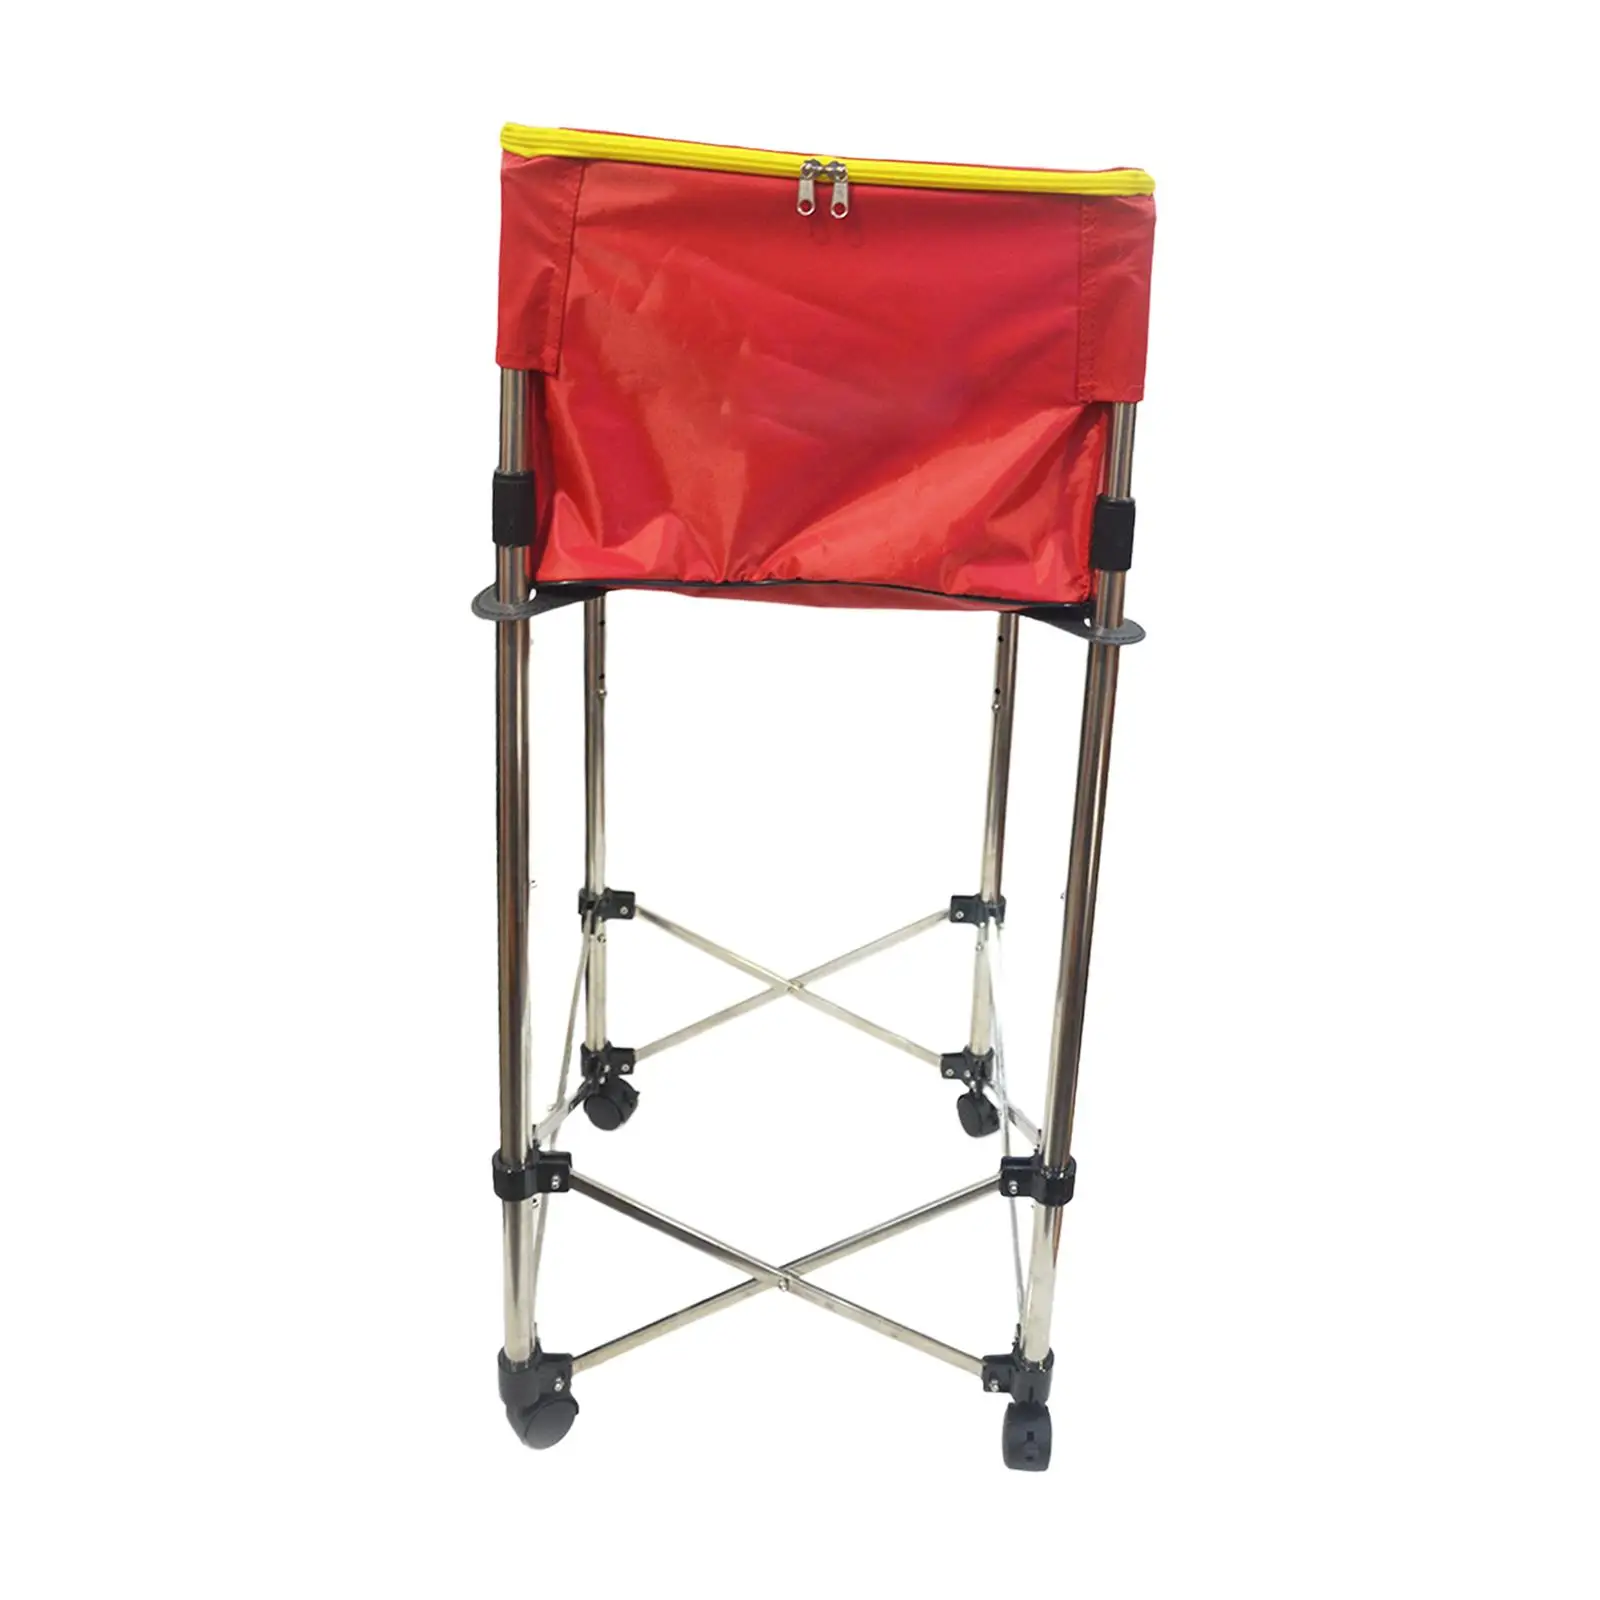 Tennis Ball Cart Removable Professional Large Capacity Tennis Ball Collection Cart with Wheels for Baseball Softball Tennis Ball